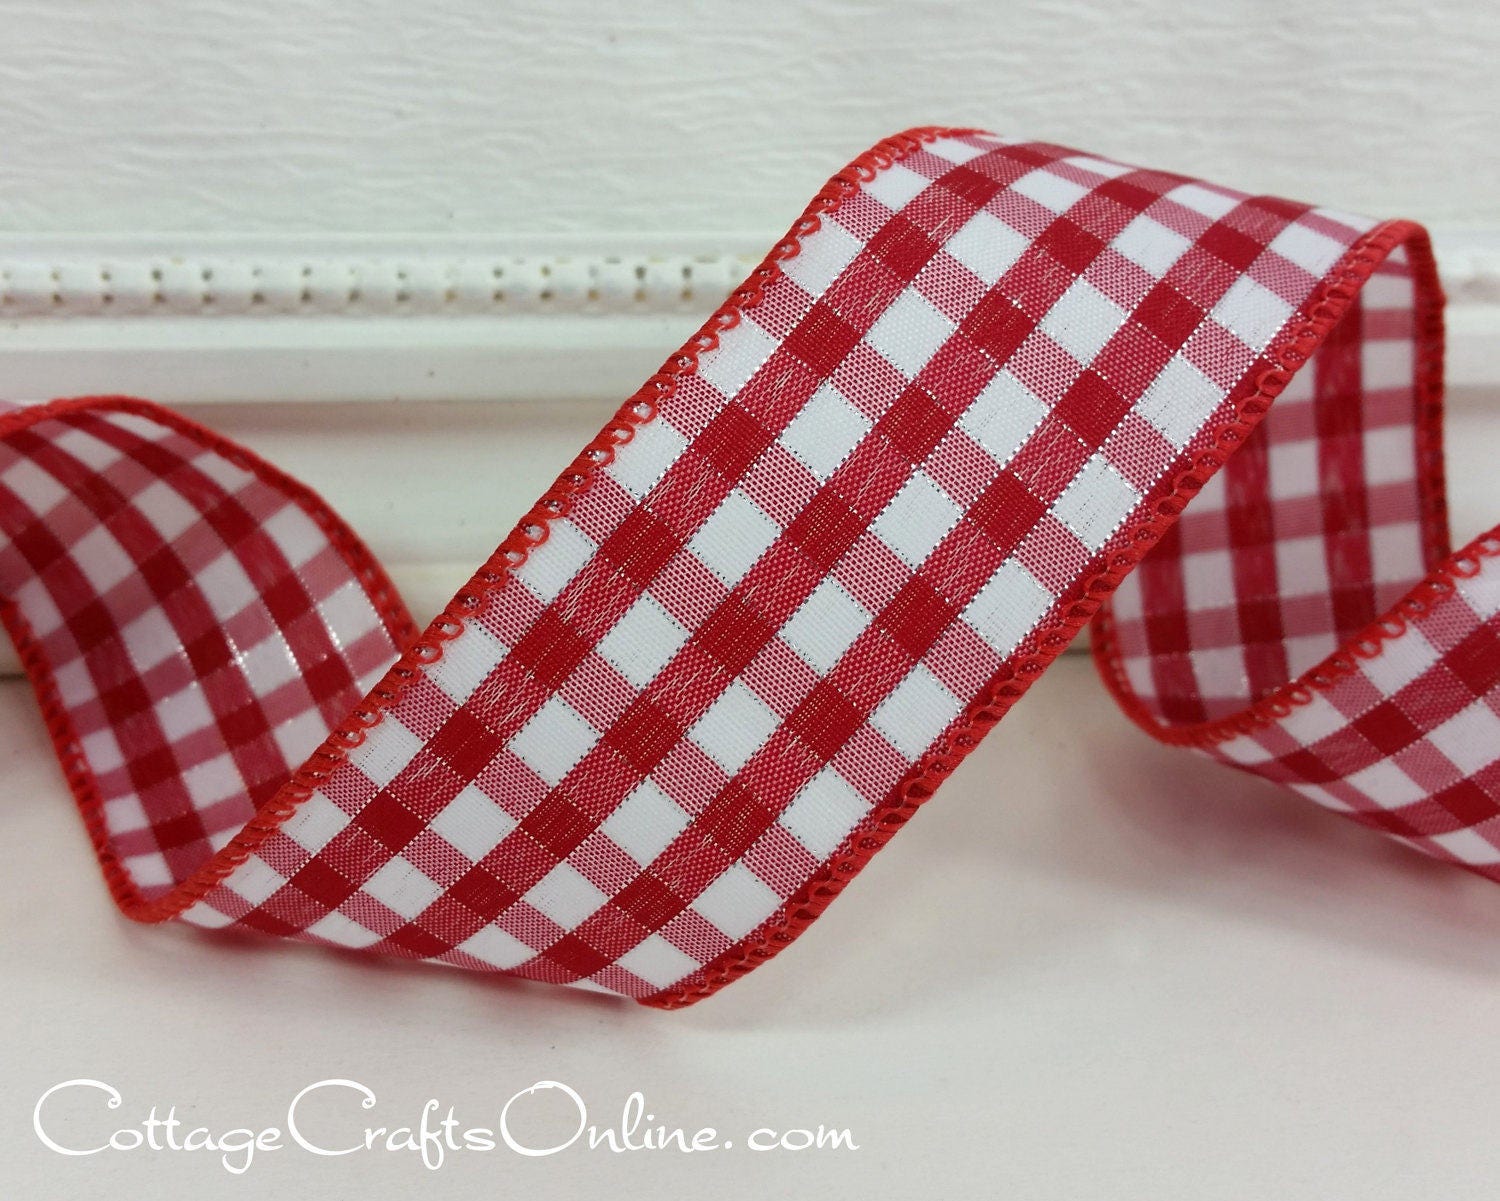 THREE YARDS, Gingham Wired Ribbon, 1.5, Red, White, Silver Metallic Check  Plaid Addison July 4th Summer Christmas Wire Edged Ribbon 